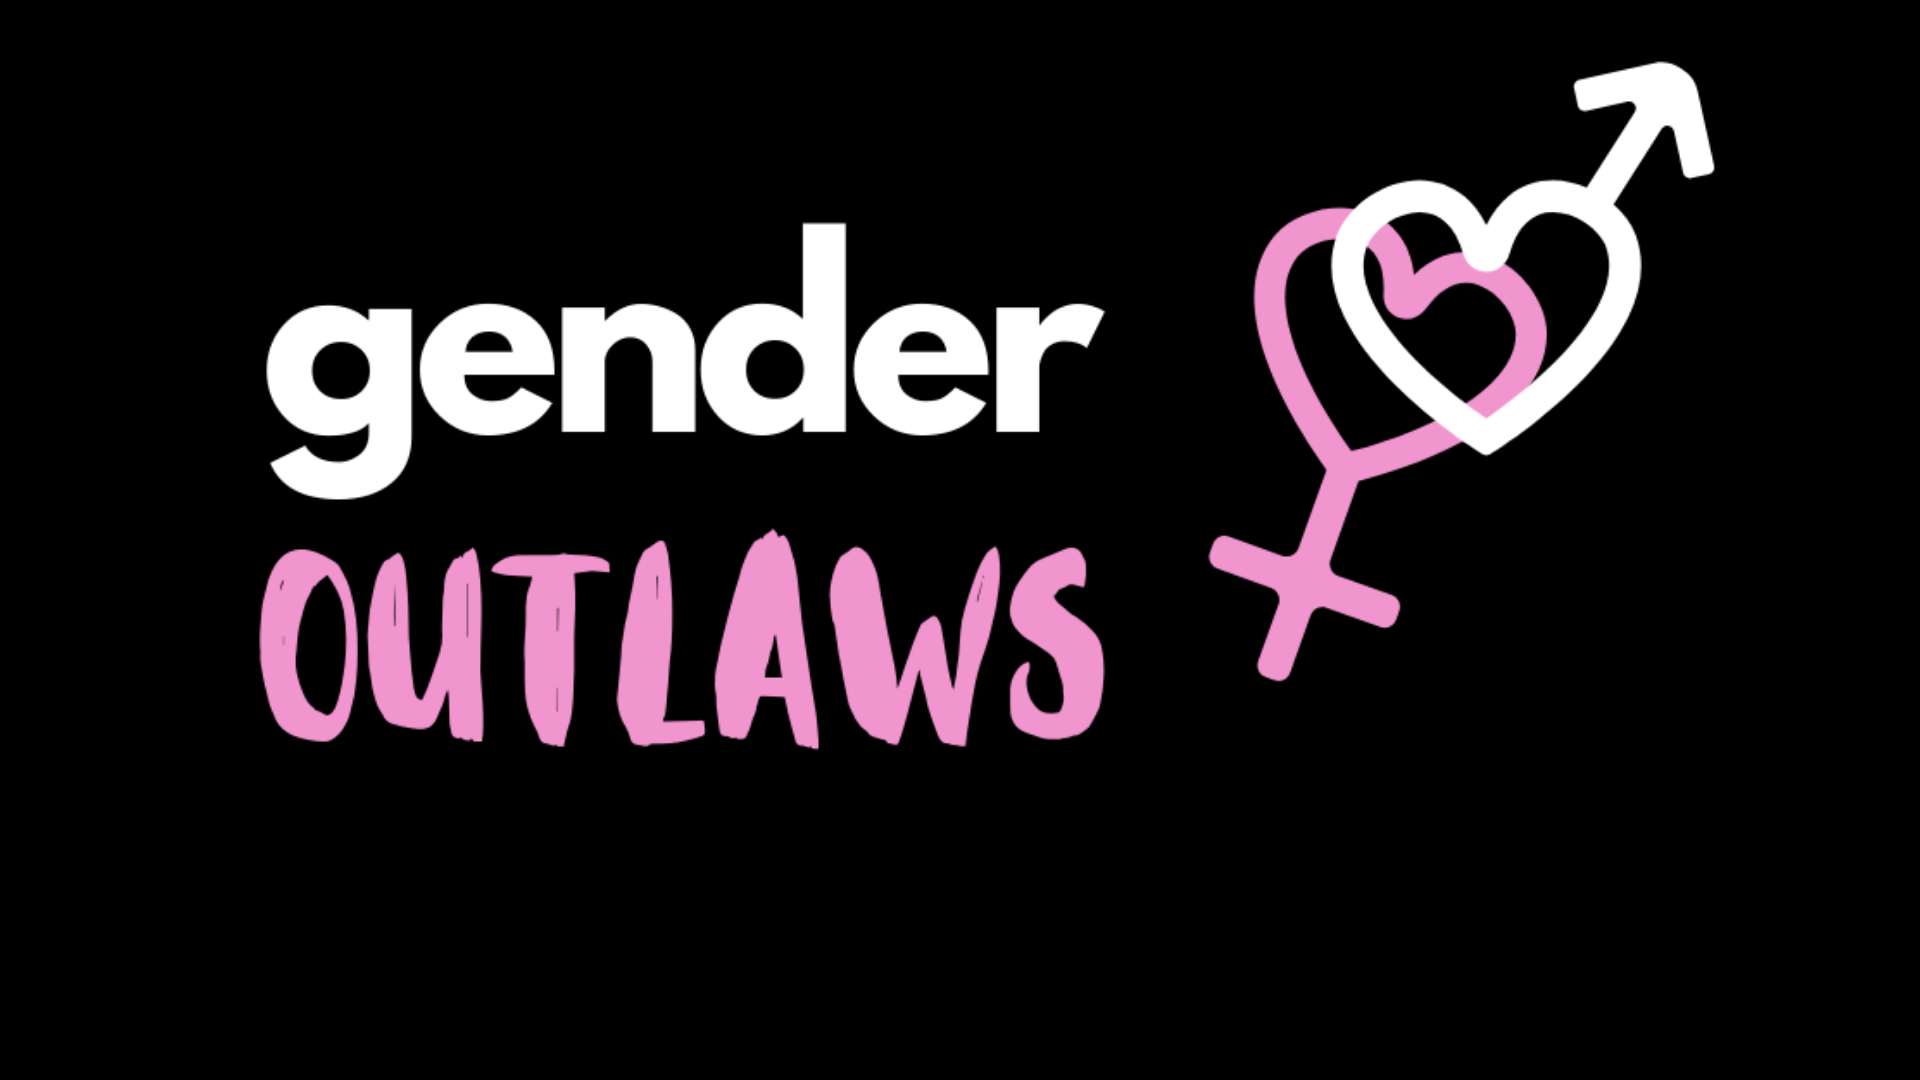 QueerEvents.ca - Toronto event listing - Gender Outlaws Comdey Show 